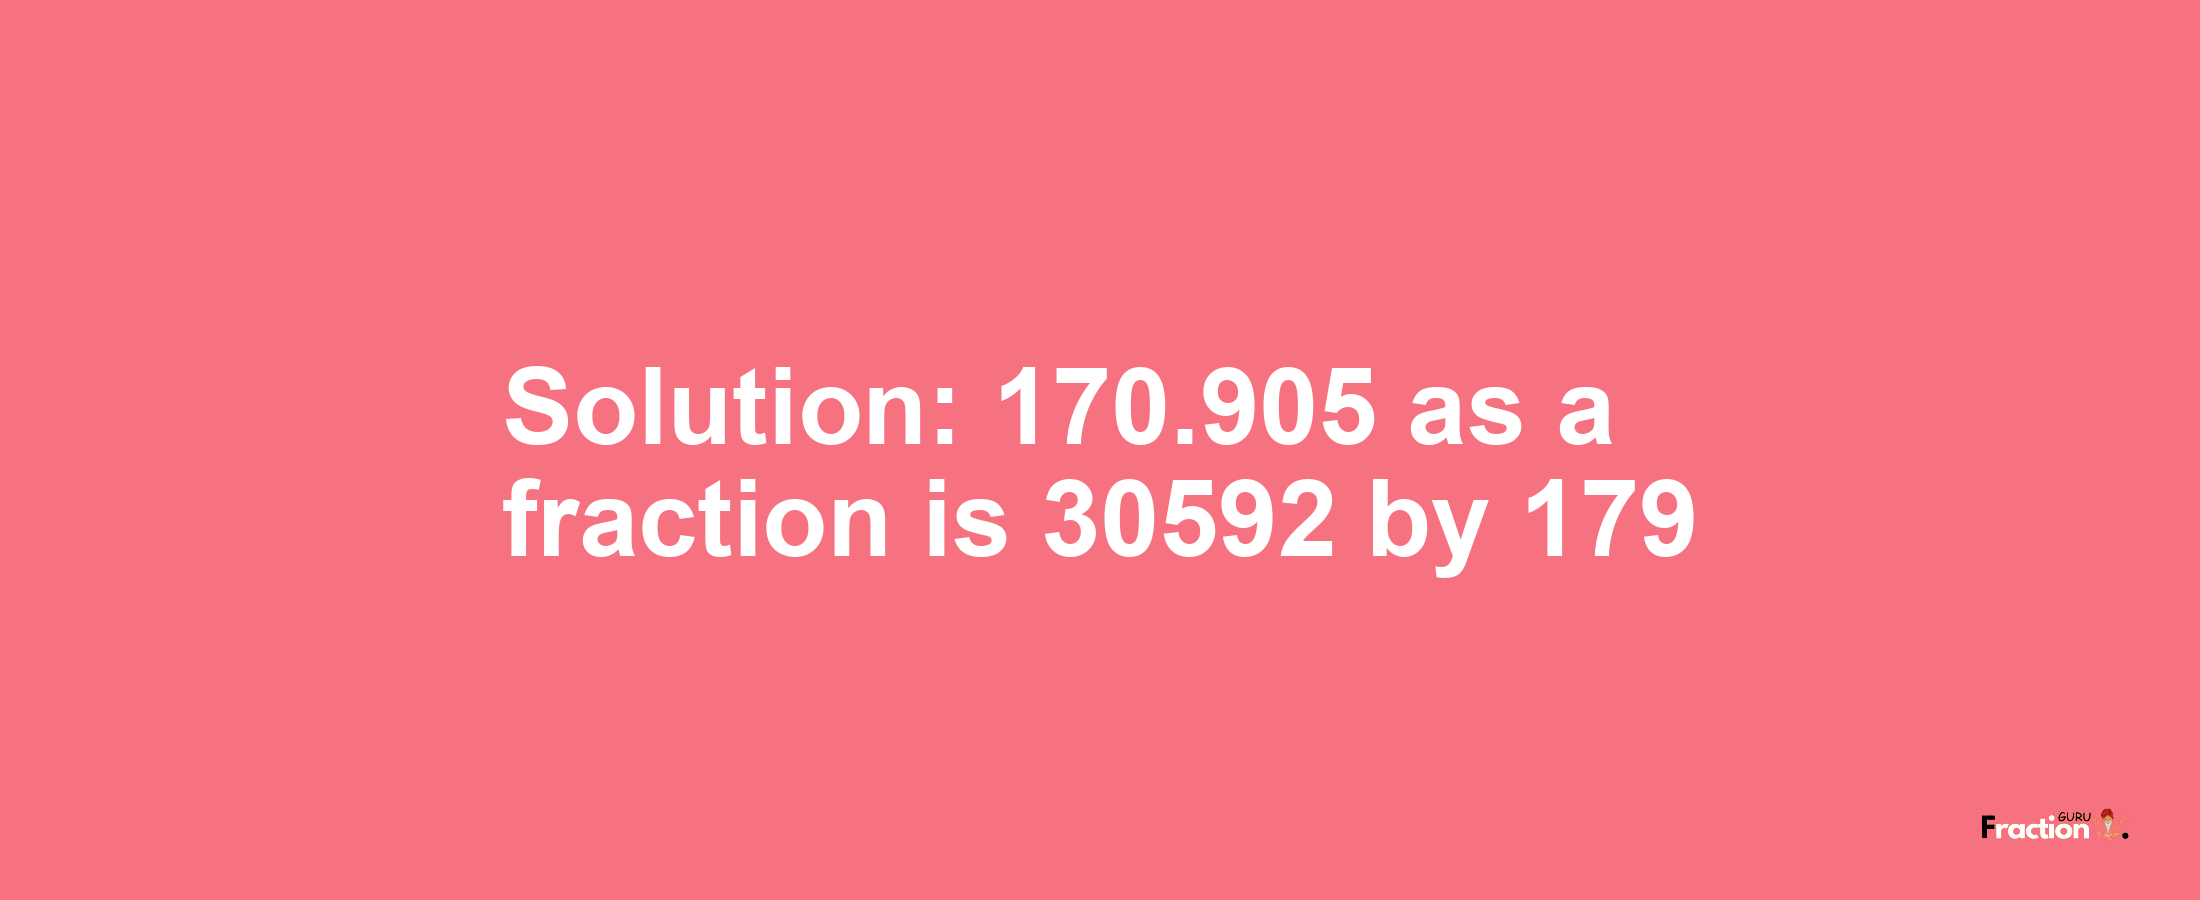 Solution:170.905 as a fraction is 30592/179